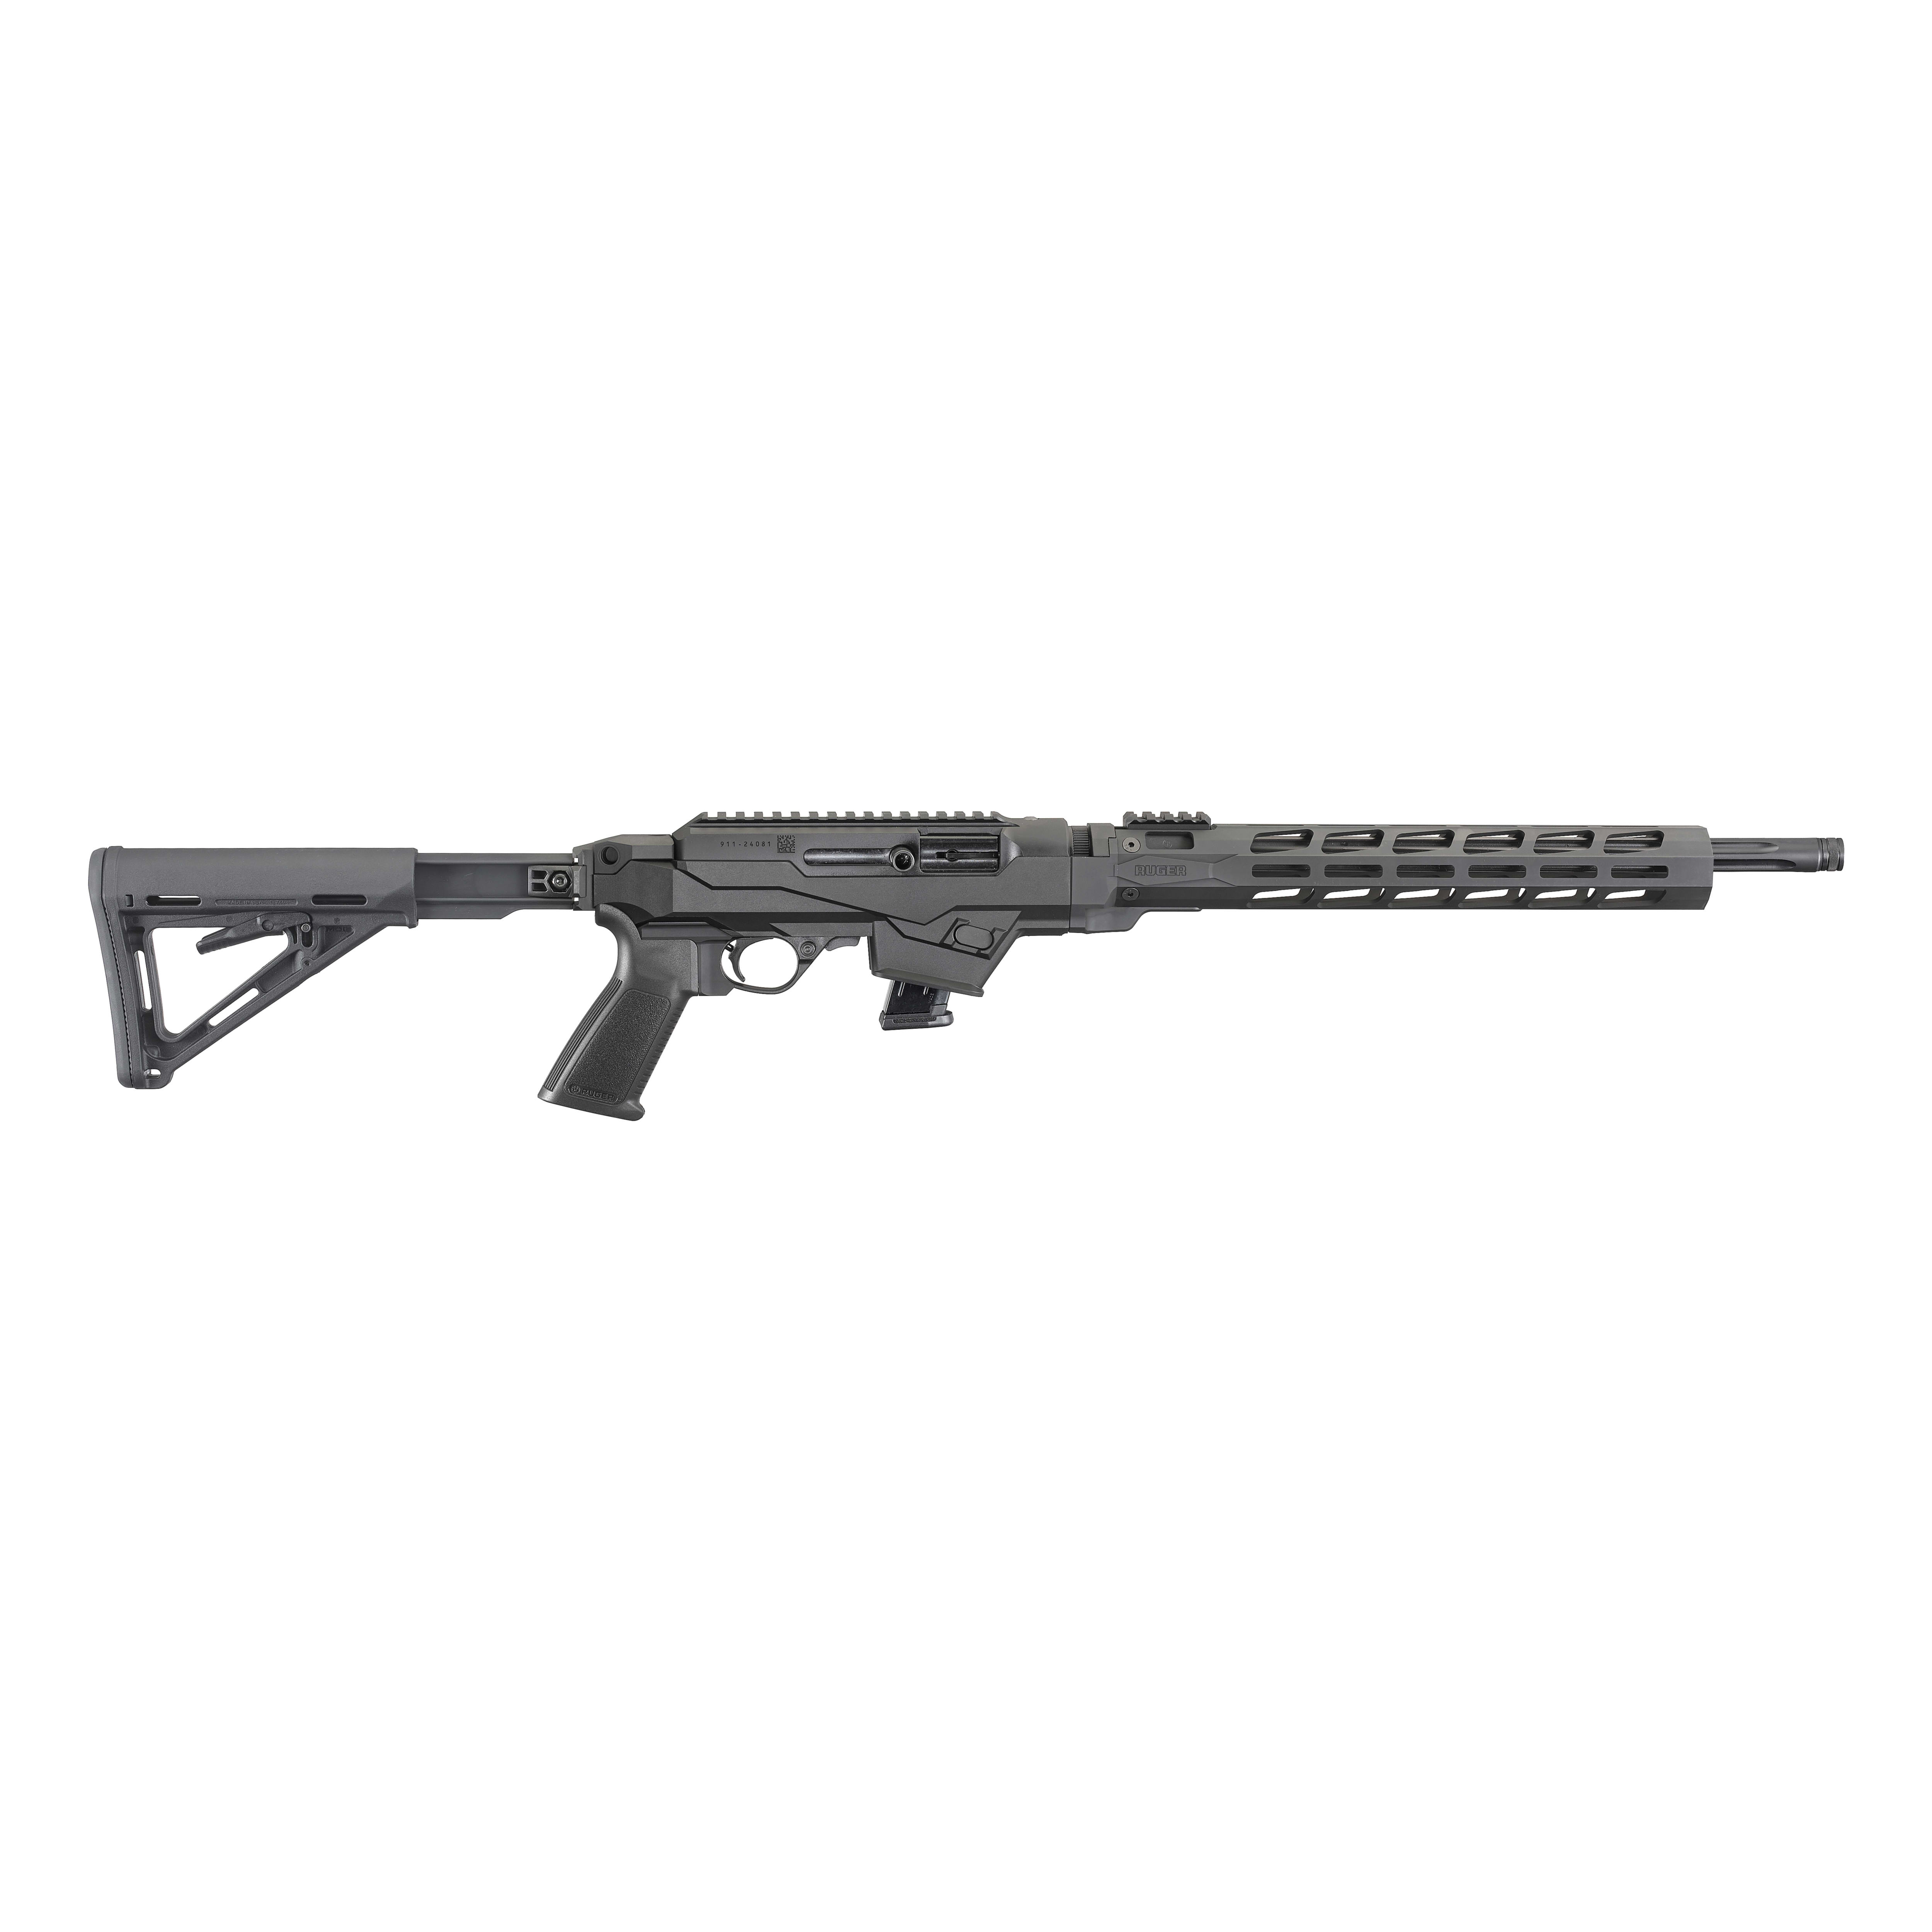 Ruger® PC Carbine with Adjustable Stock Semi-Automatic Rifle